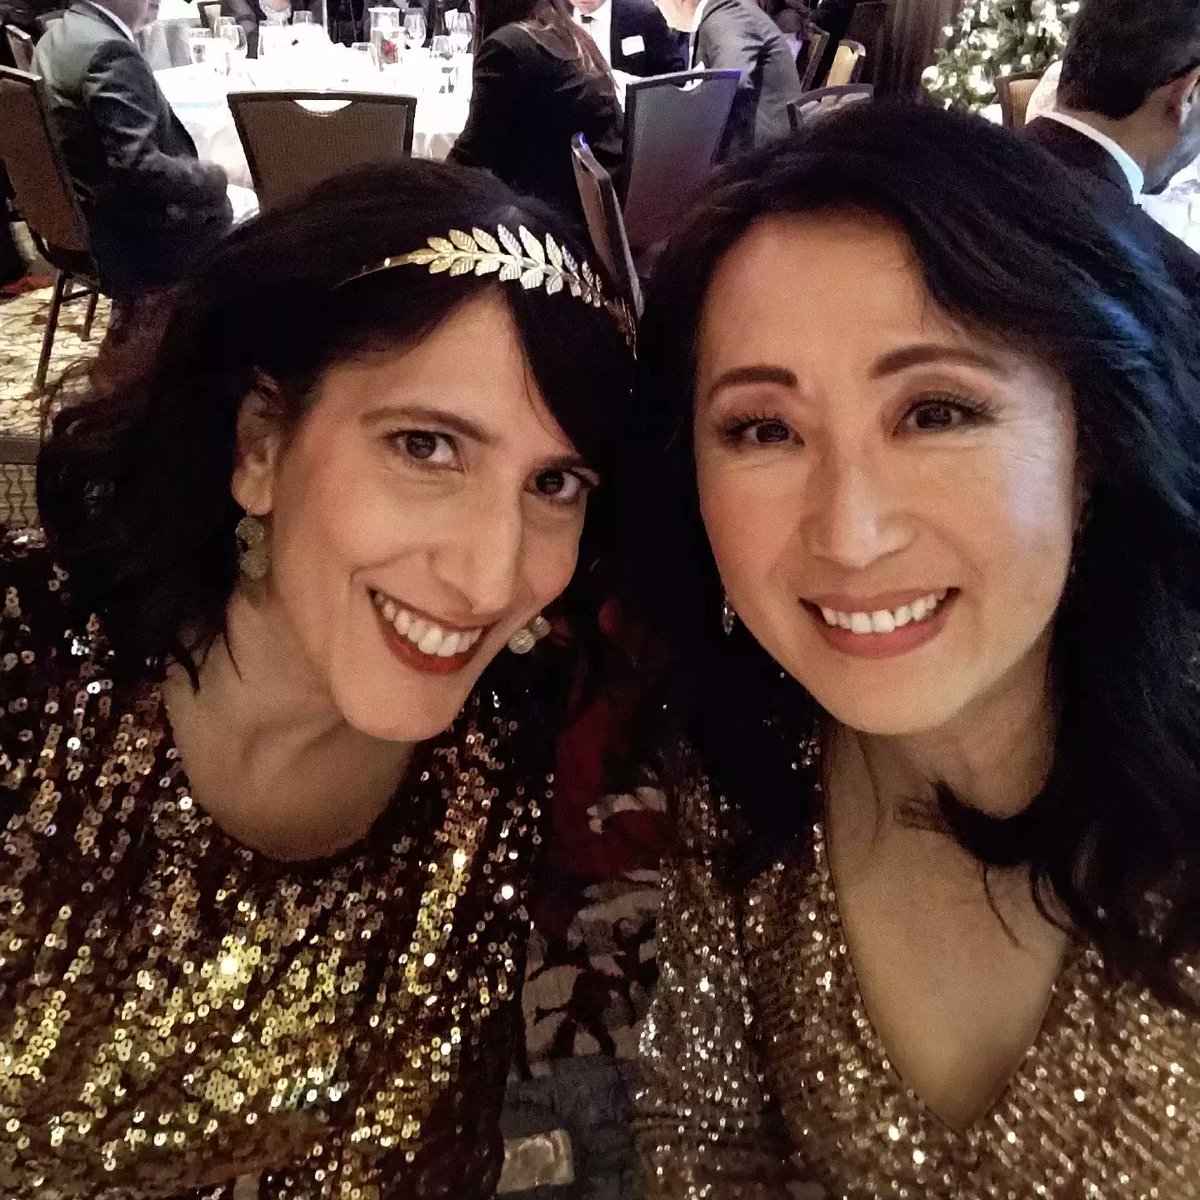 From the Pinky Twins to the Glitter Sisters, @mijungleectv and I inadvertently know how to rock the matching outfits. @ArthritisSoc